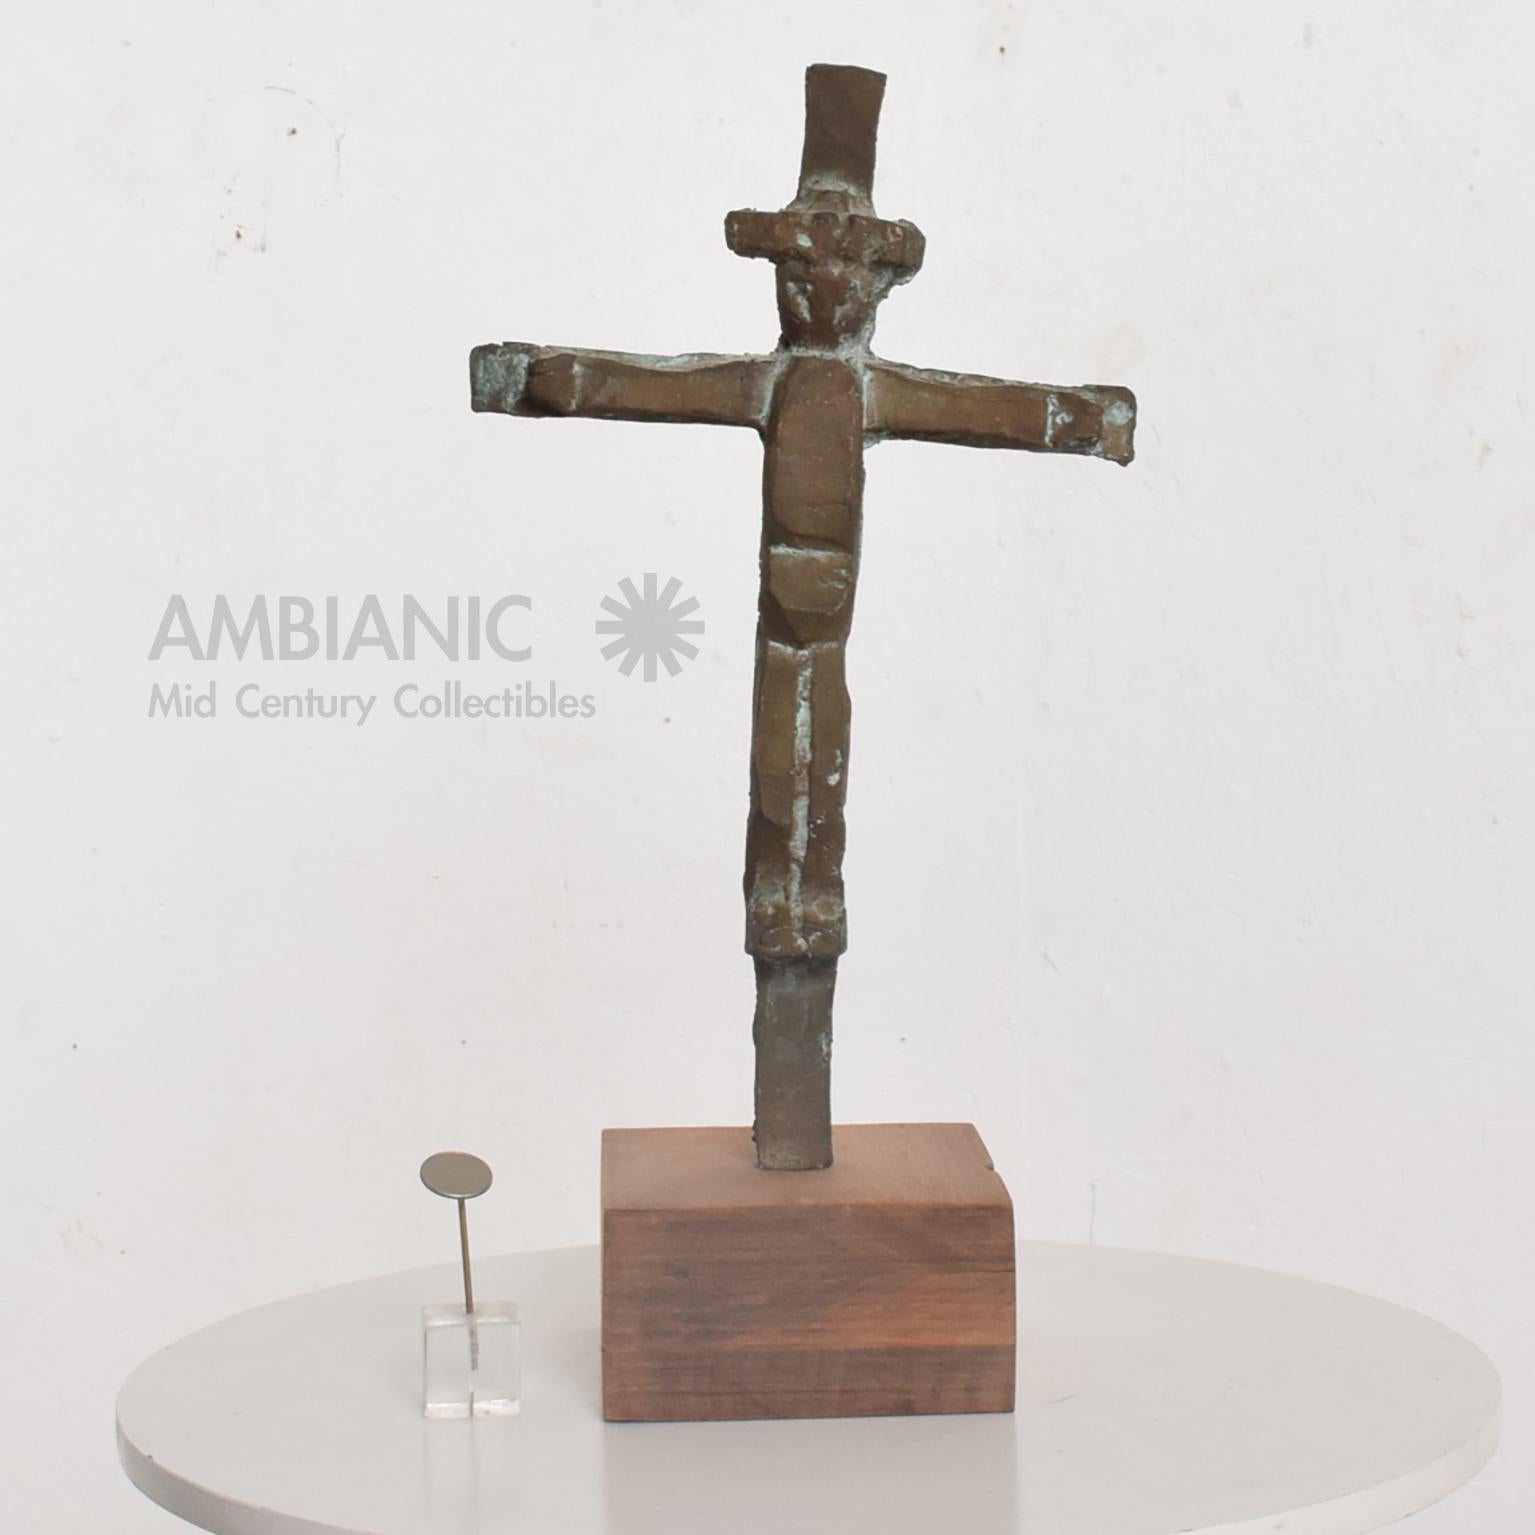 Sculpture
Modern Abstract Art Bronze Cross Sculpture by Myrna Nobile, artist and sculptor from San Diego La Jolla, CA 1960s
Bronze Cross mounted on Walnut Wood.
17.75 H x 9.13 W x 5.75
Original unrestored vintage condition.
Please see images